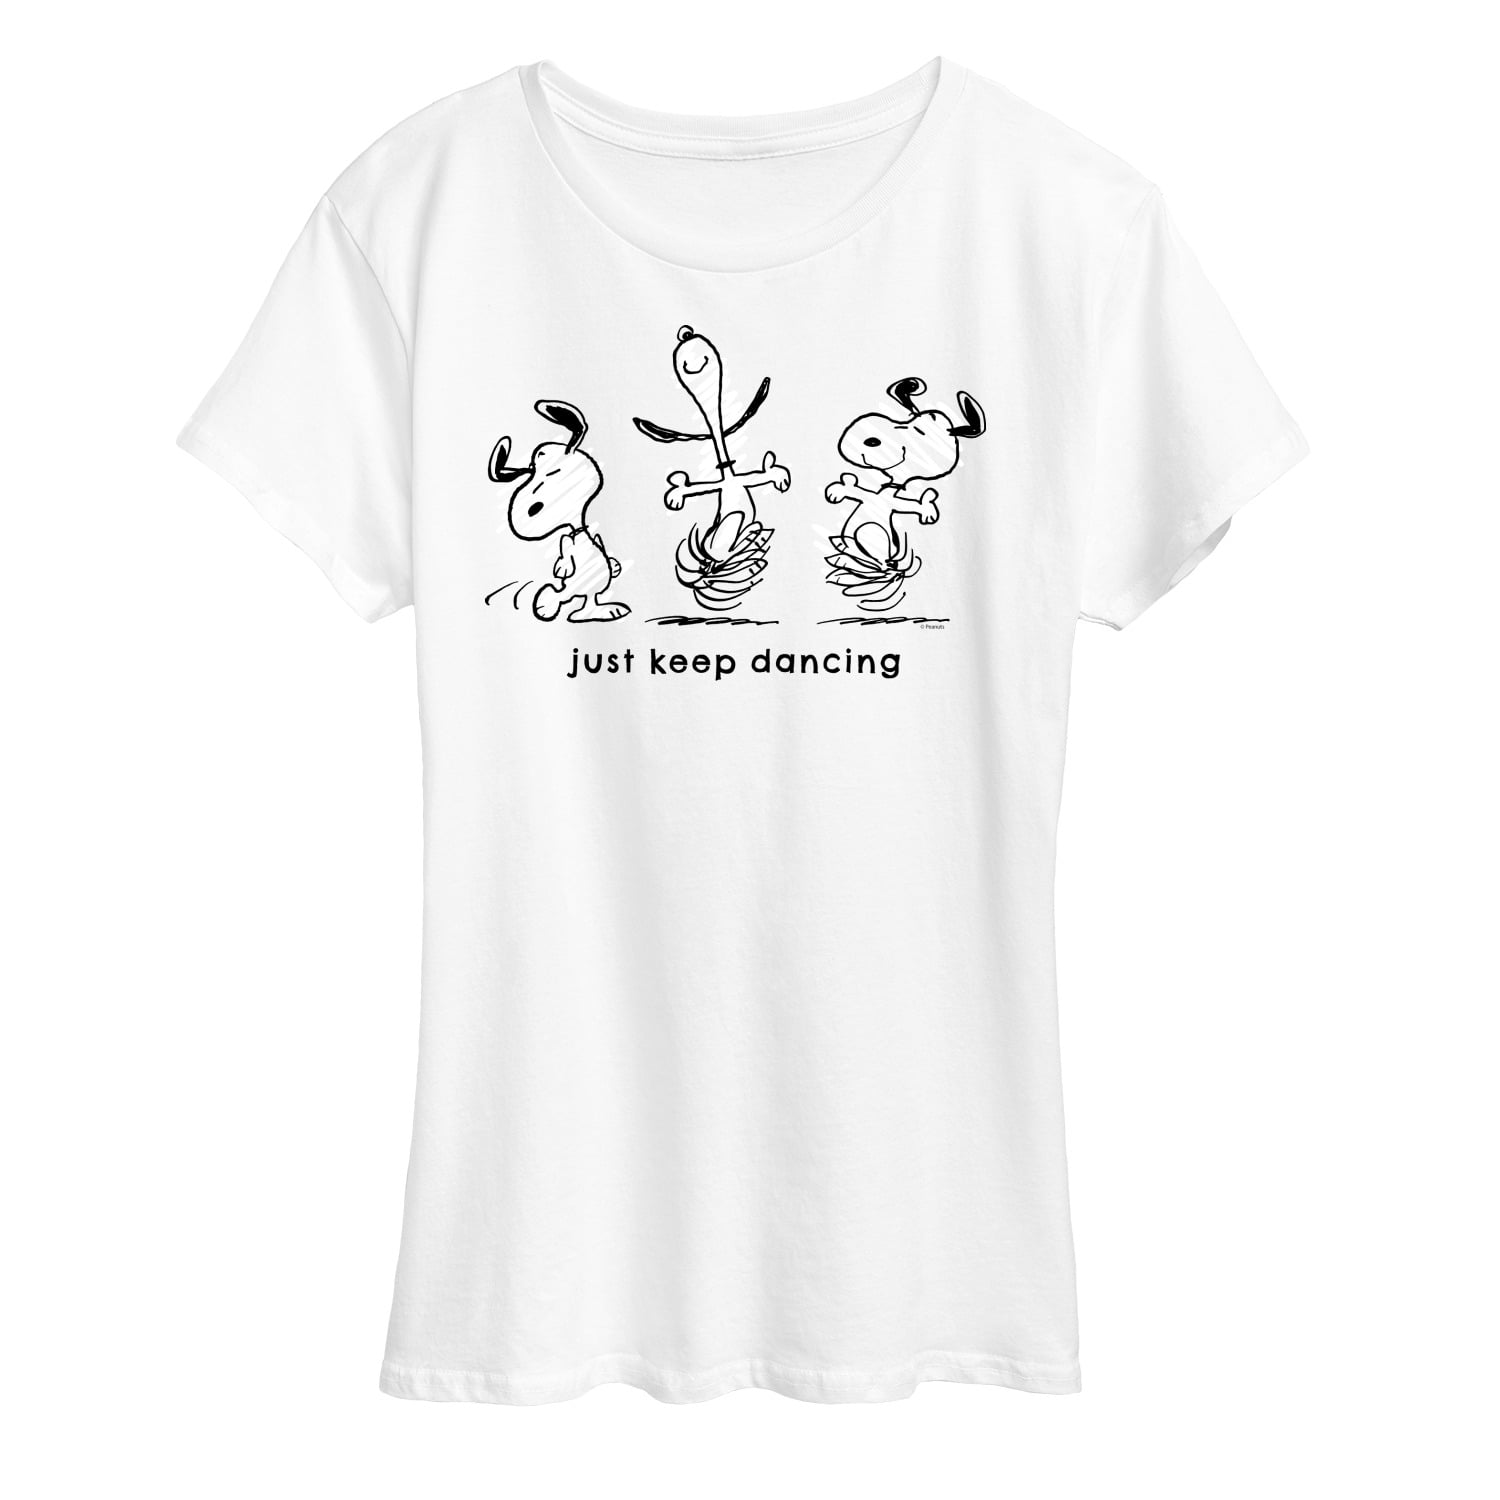 Peanuts - Snoopy Just Keep Dancing - Women\'s Short Sleeve Graphic T-Shirt